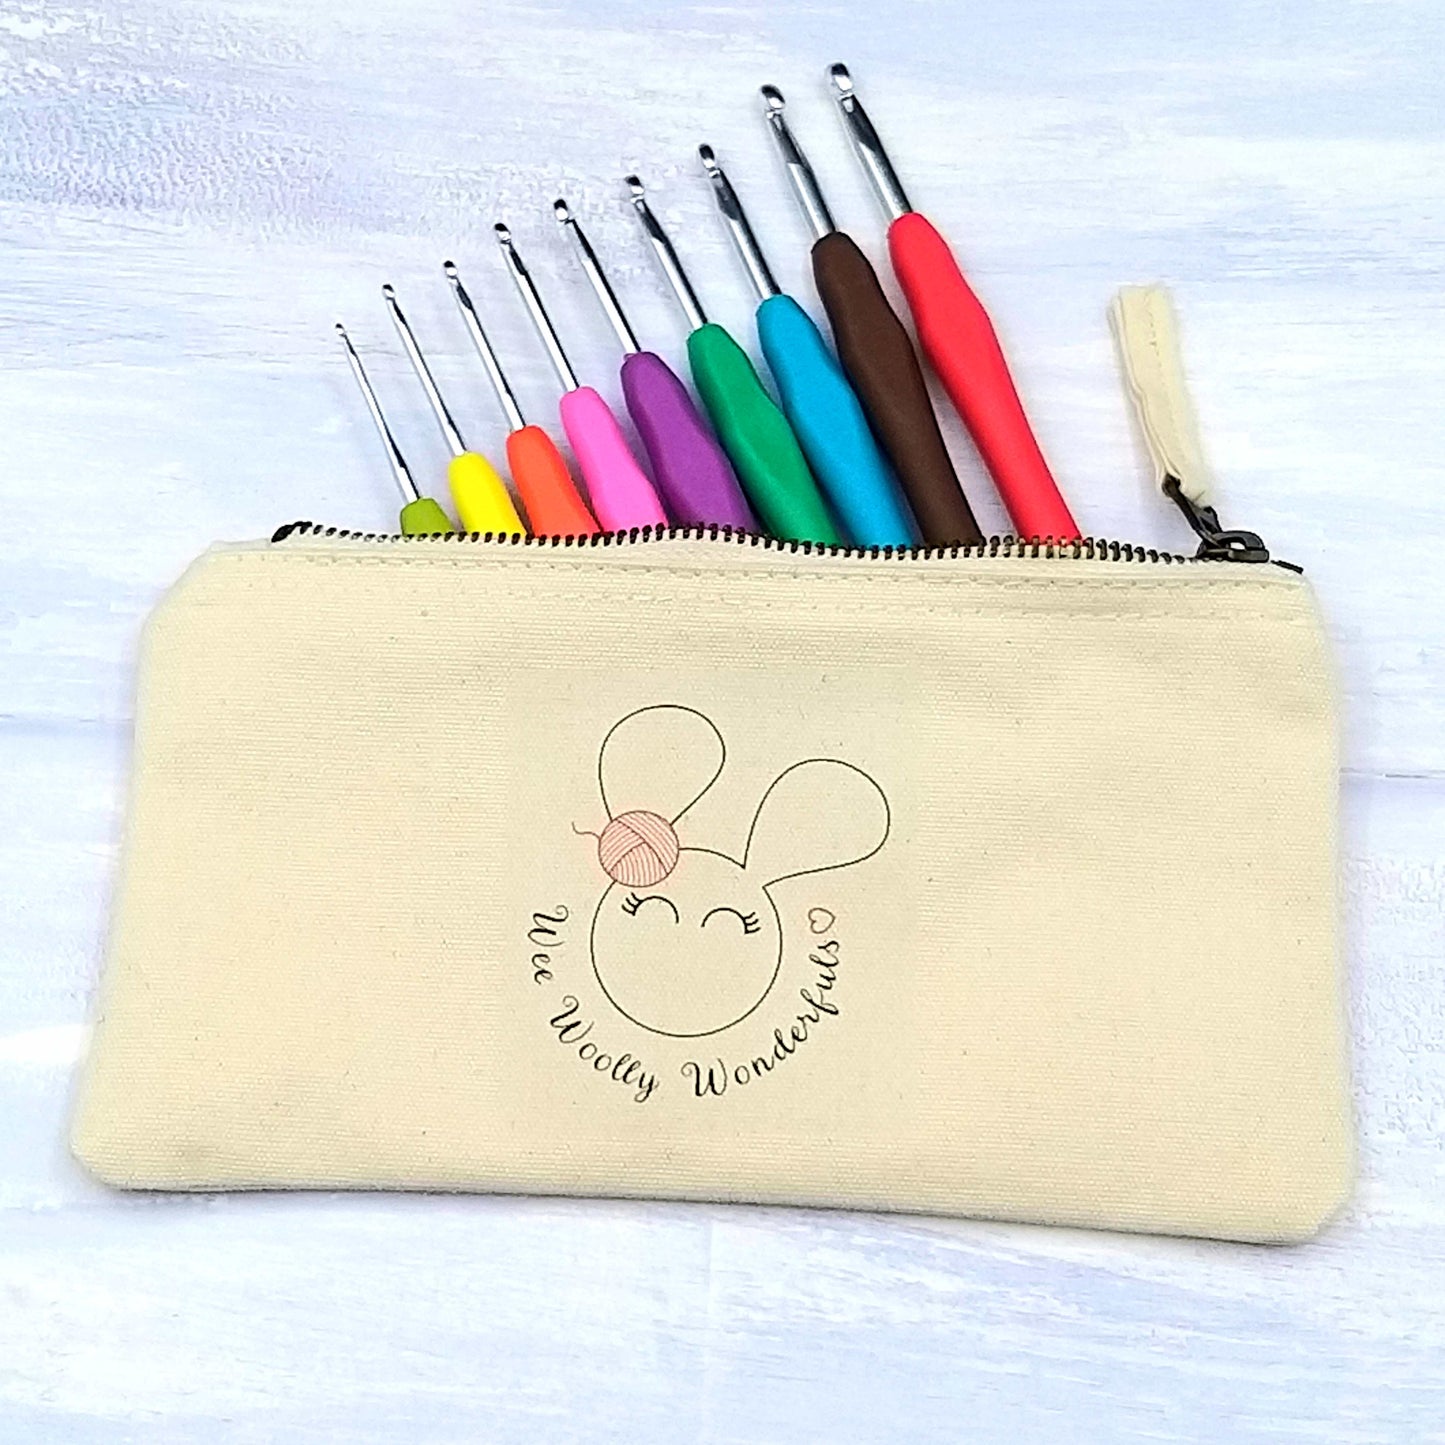 Small Zip Case - available with Crochet Hook Set